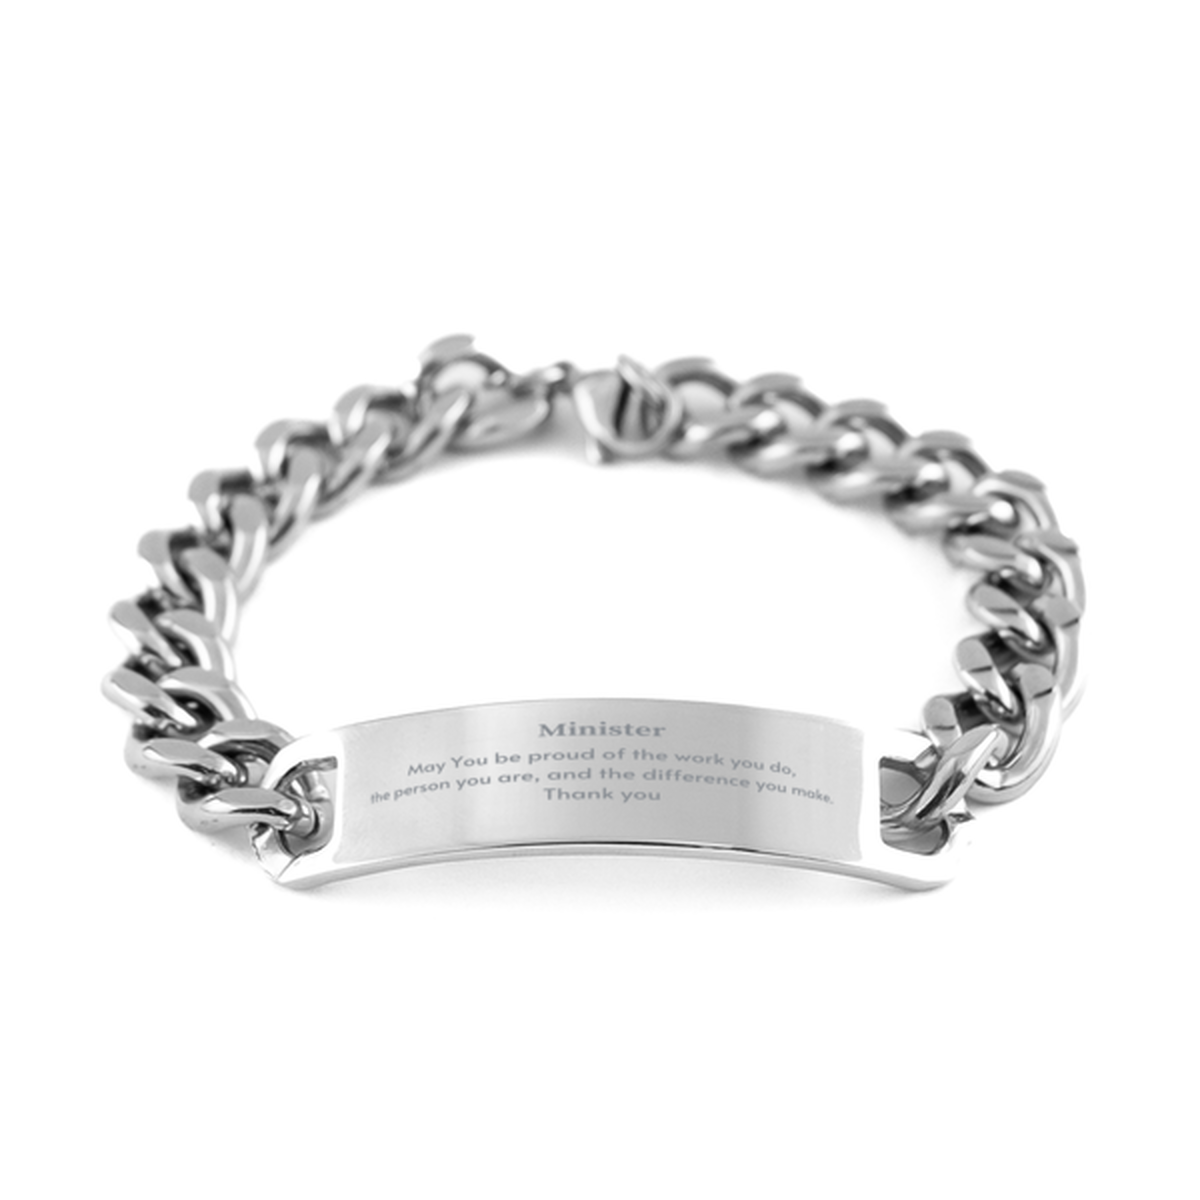 Heartwarming Cuban Chain Stainless Steel Bracelet Retirement Coworkers Gifts for Minister, Minister May You be proud of the work you do, the person you are Gifts for Boss Men Women Friends